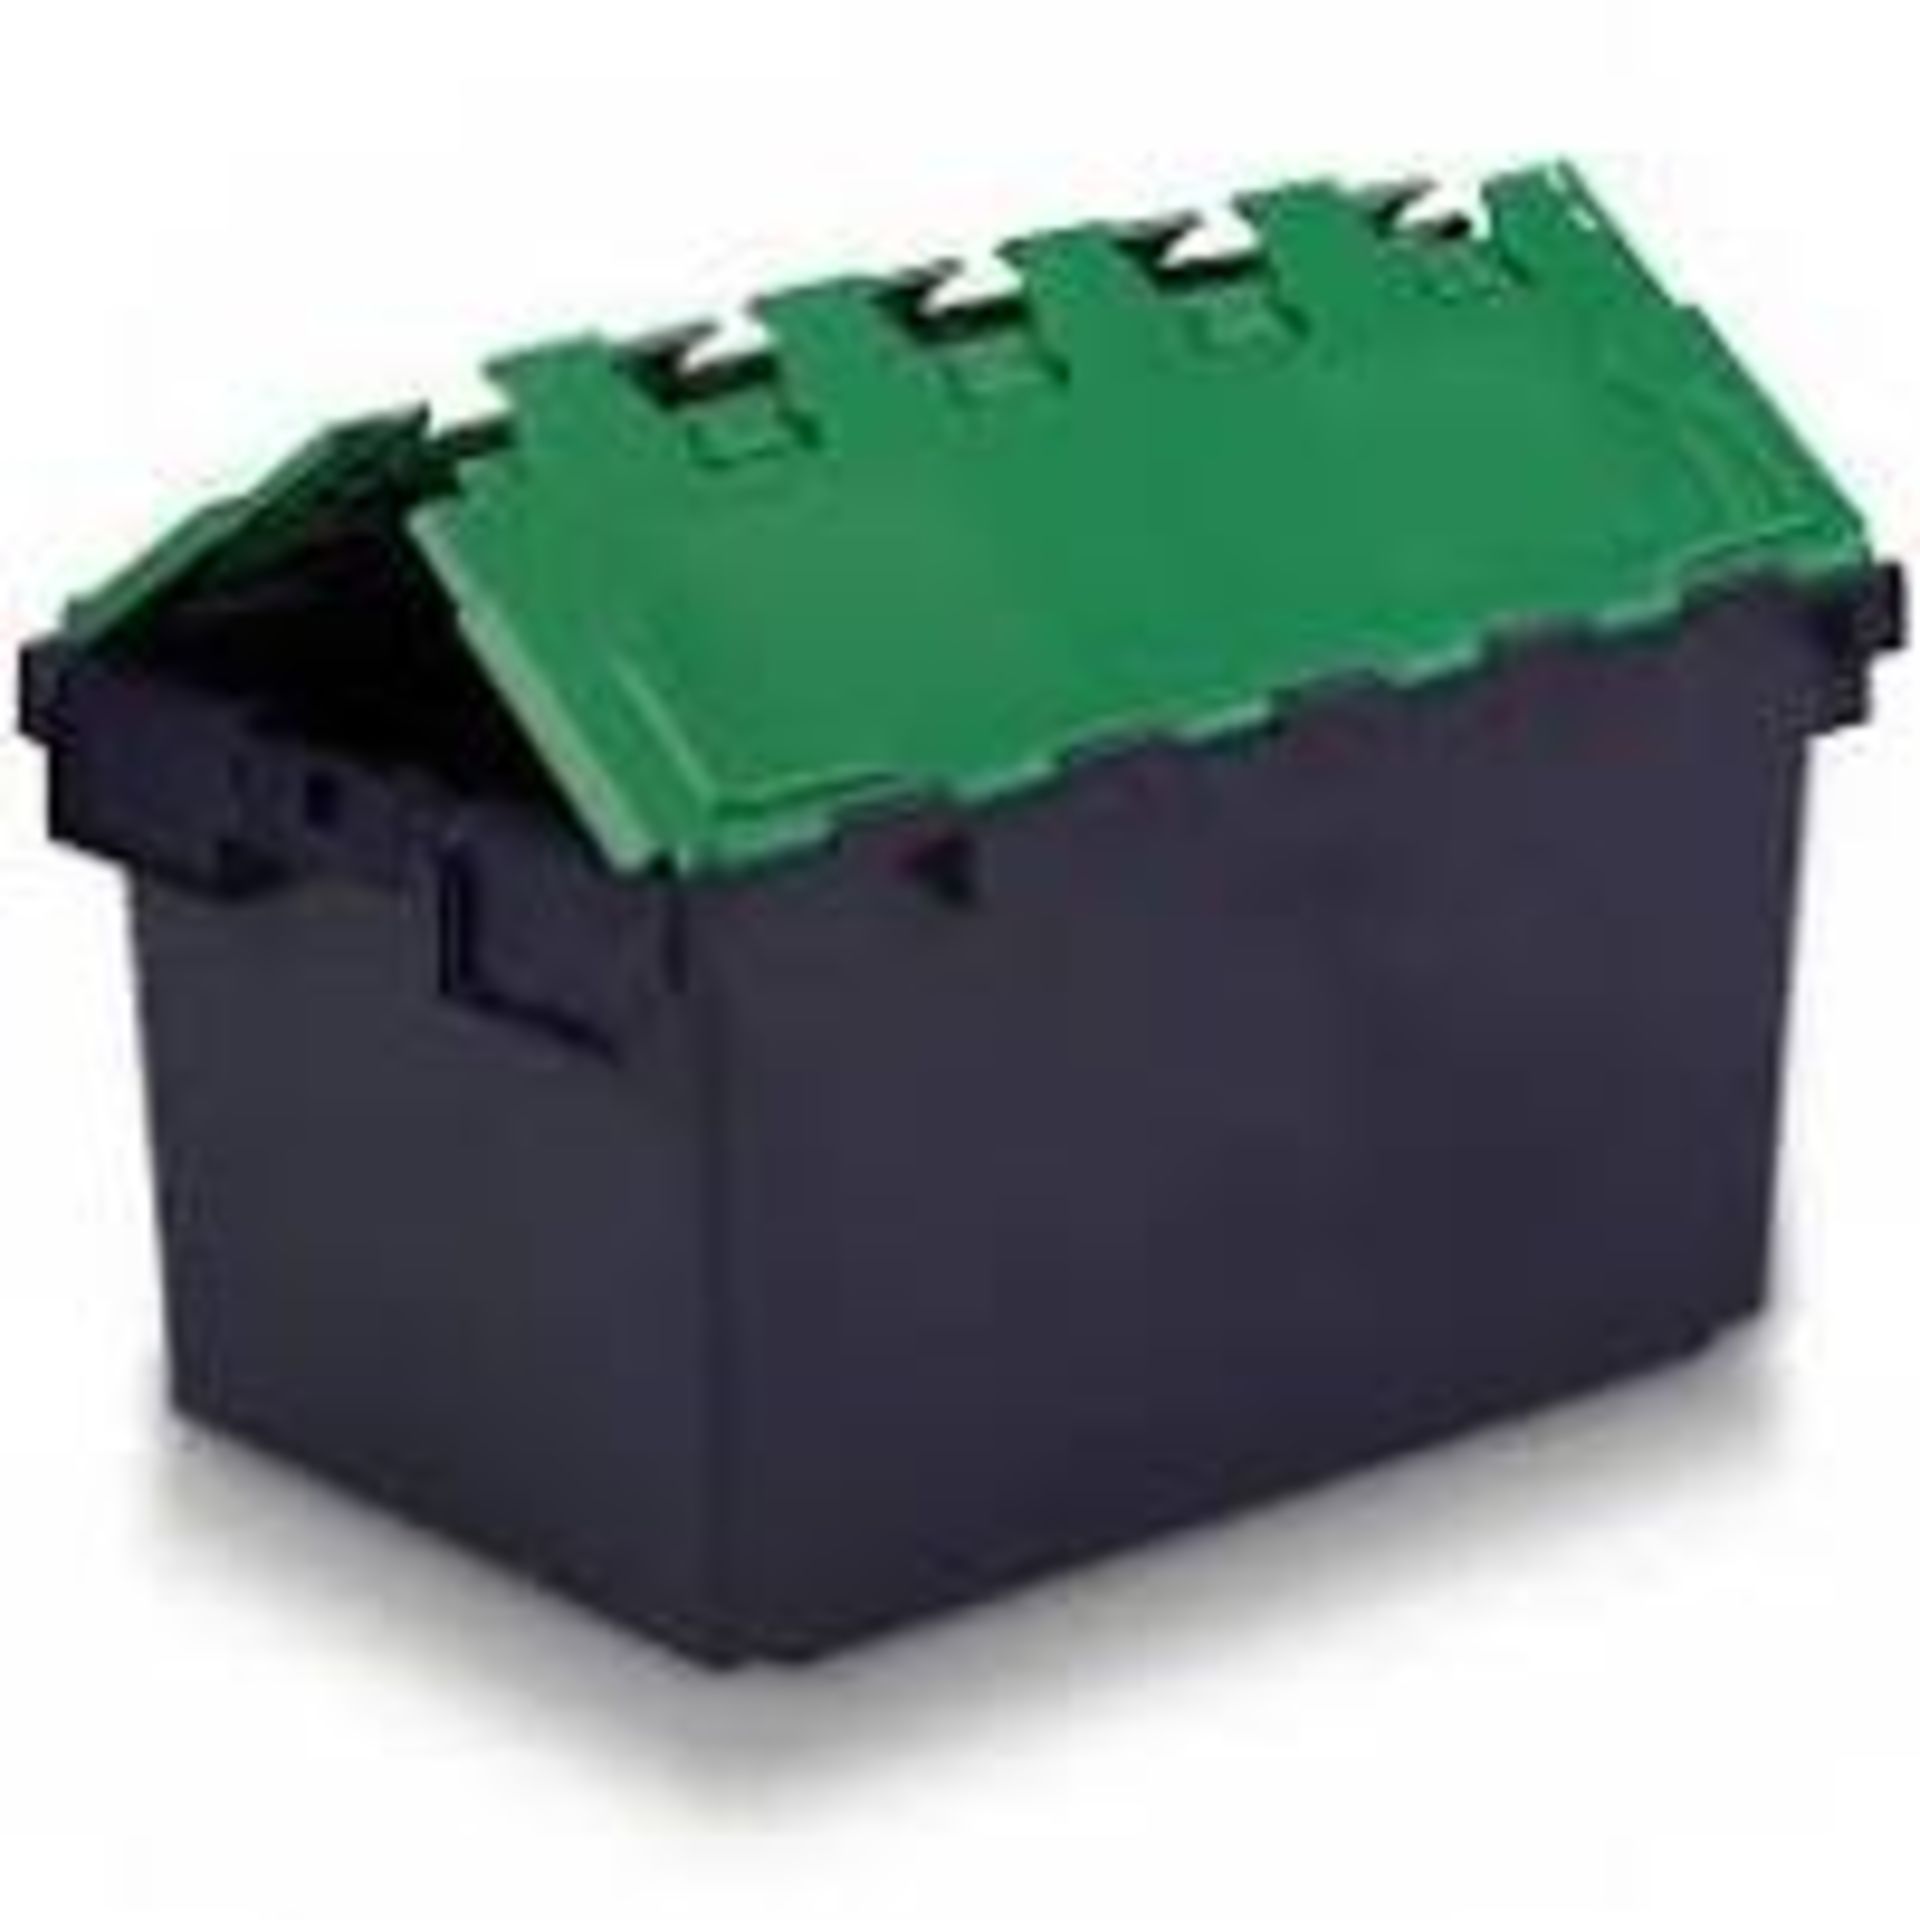 (REF2056166) Pallet of Customer Returns - Retail value at new £817.26. To include: FLIP LID BOX - Image 5 of 7